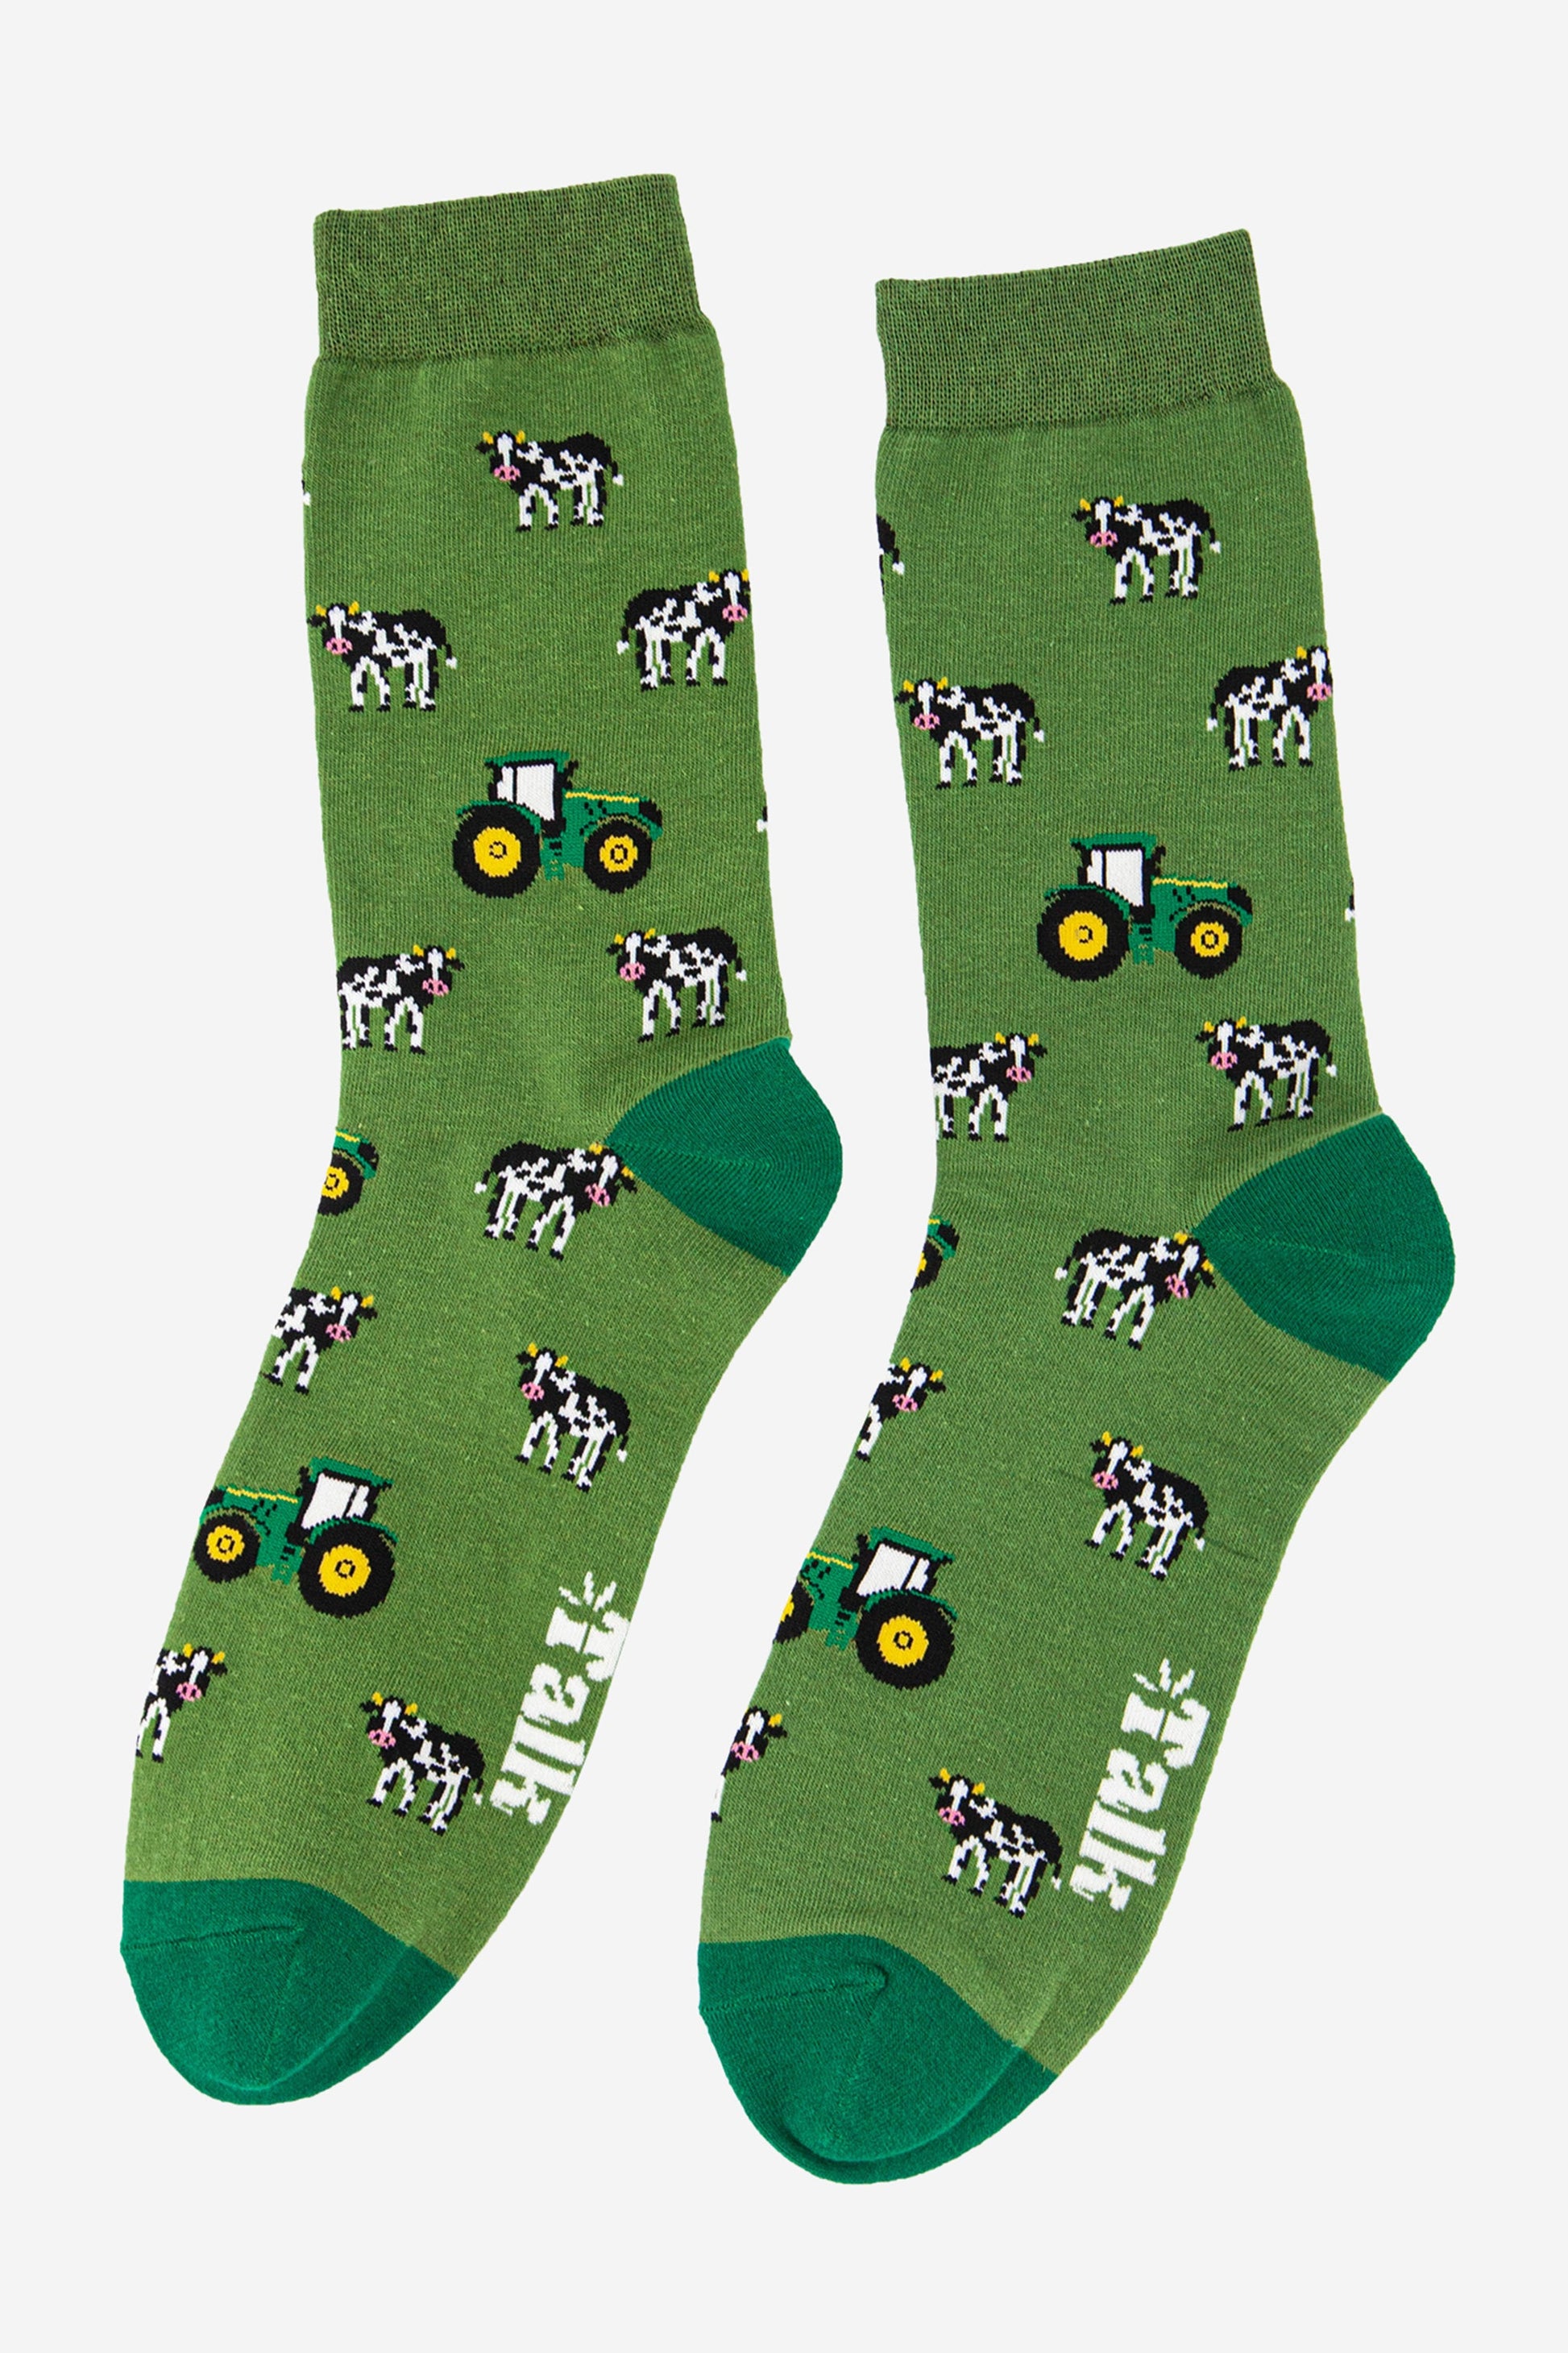 green novelty socks featuring a pattern of cows and tractors